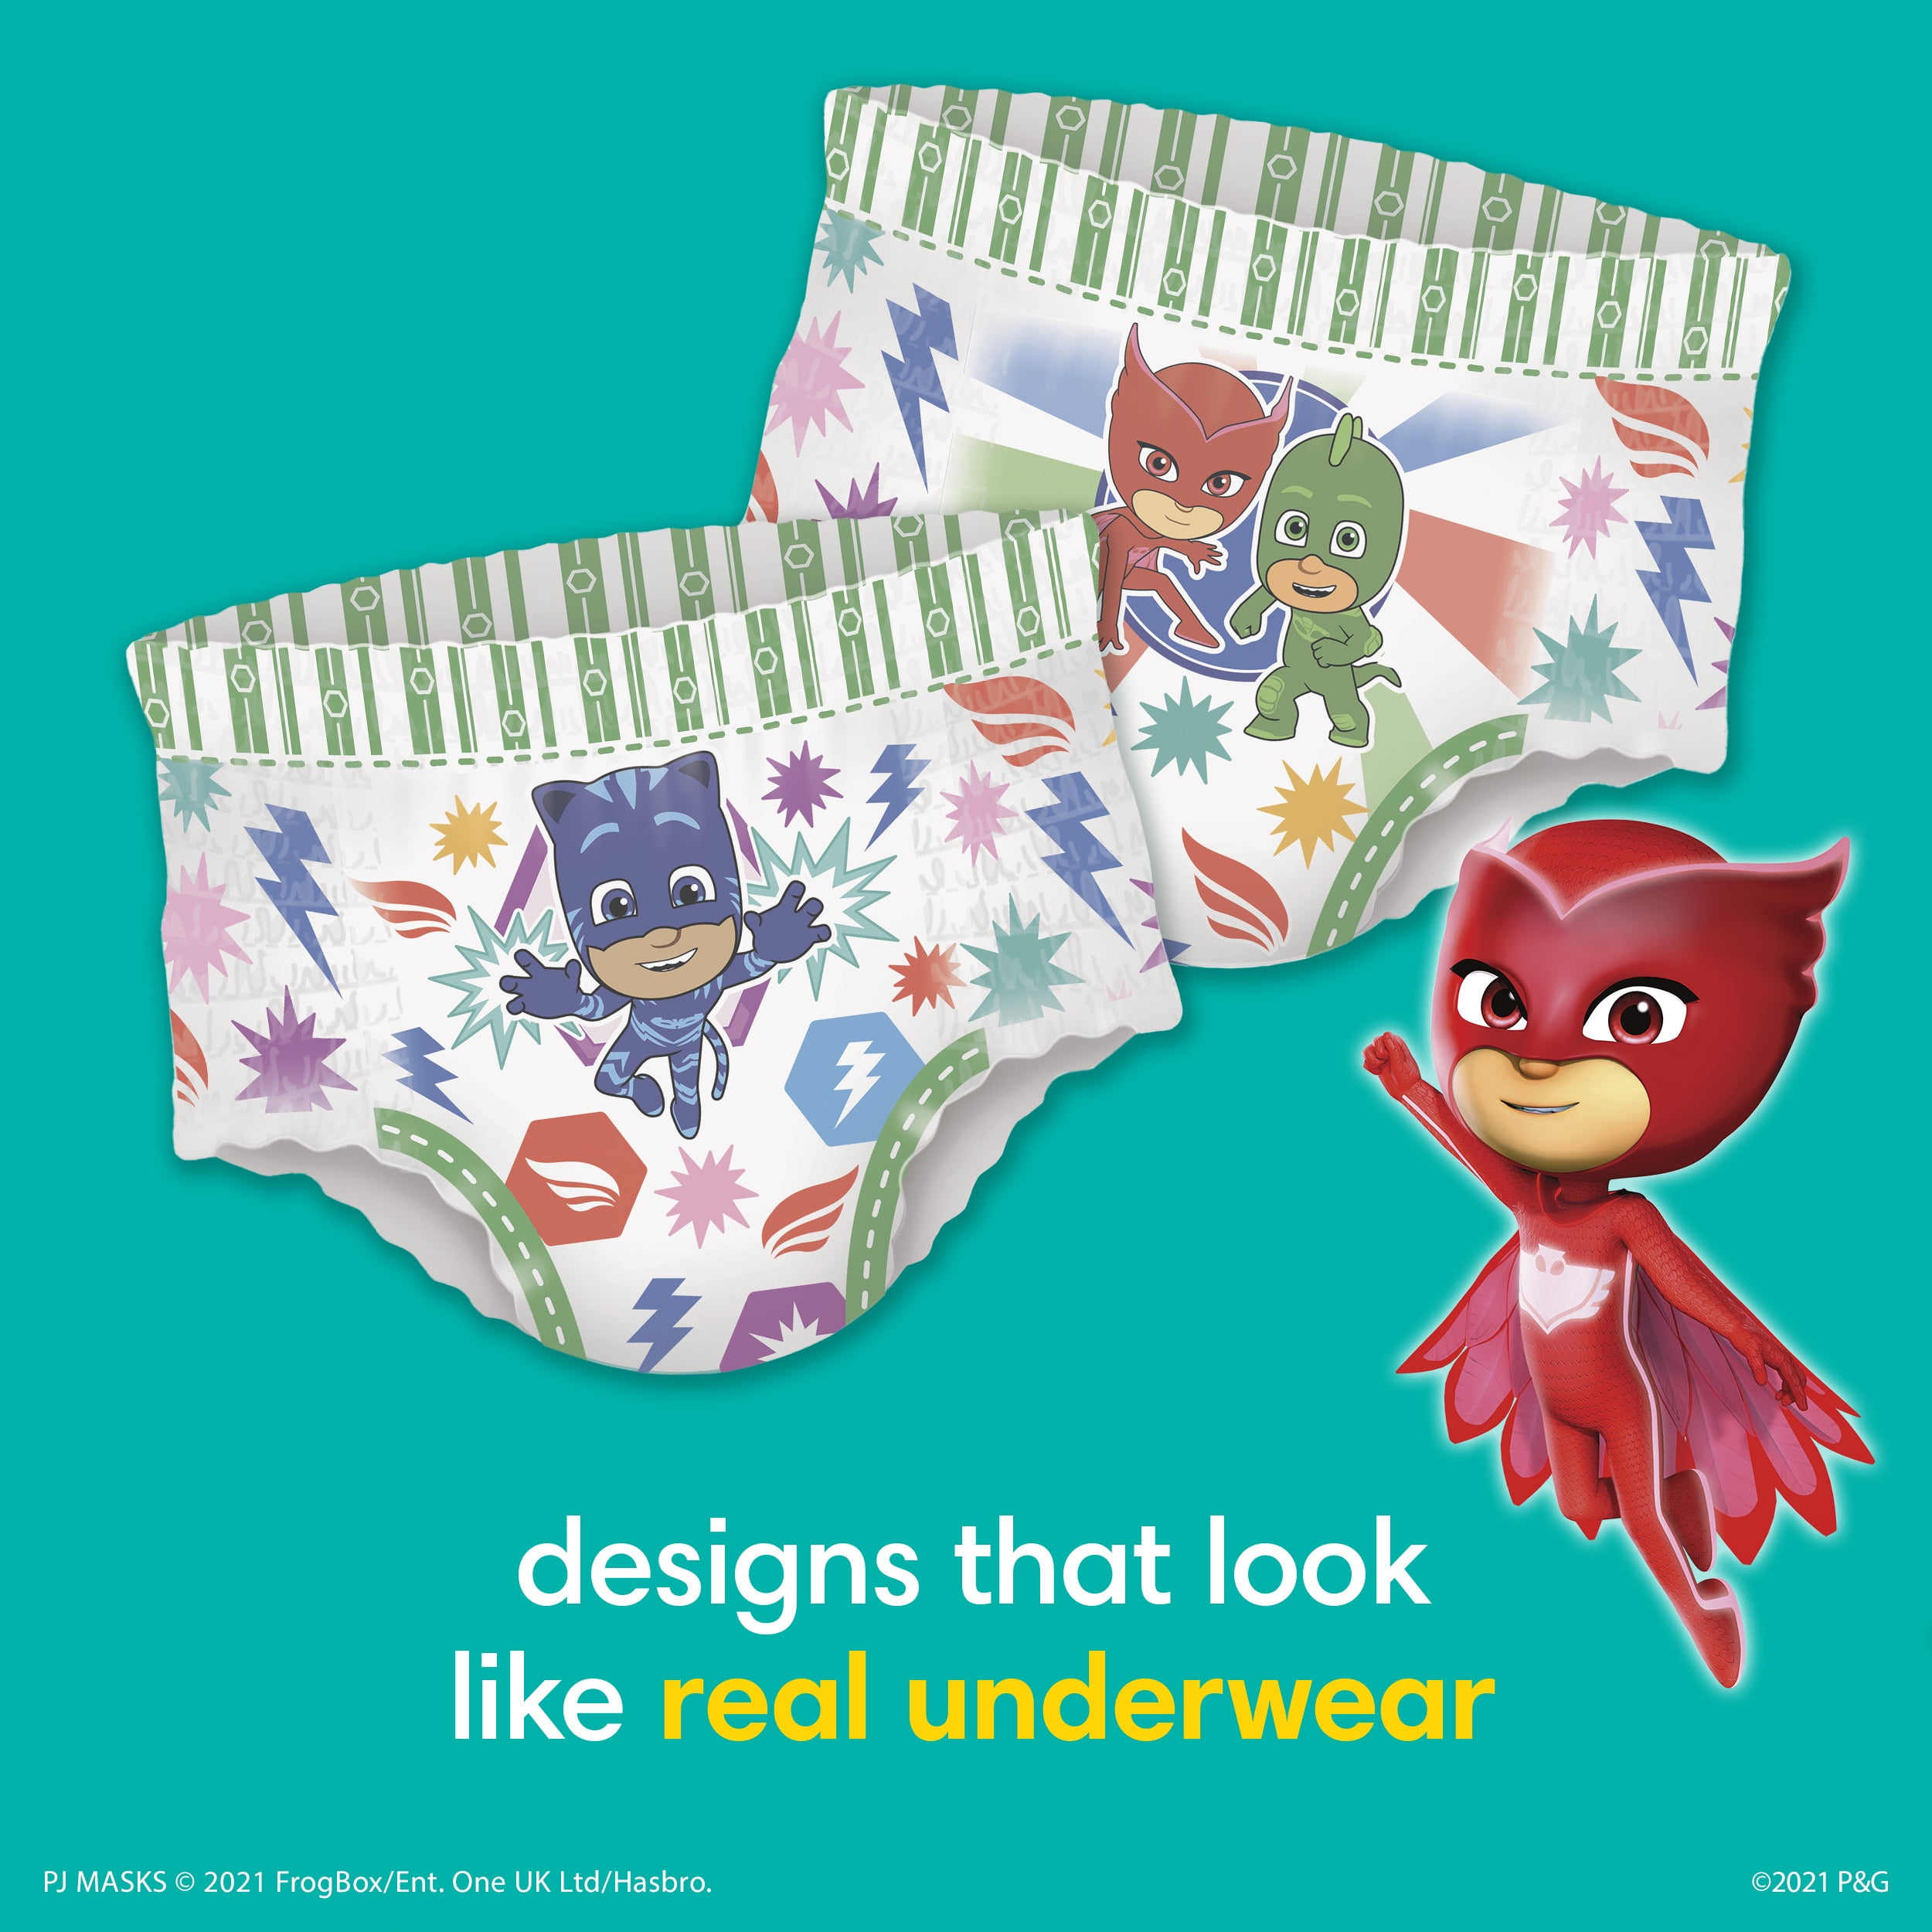 Pampers Easy Ups Training Underwear For Boys (22 units, size 5, 3t-4t), Delivery Near You